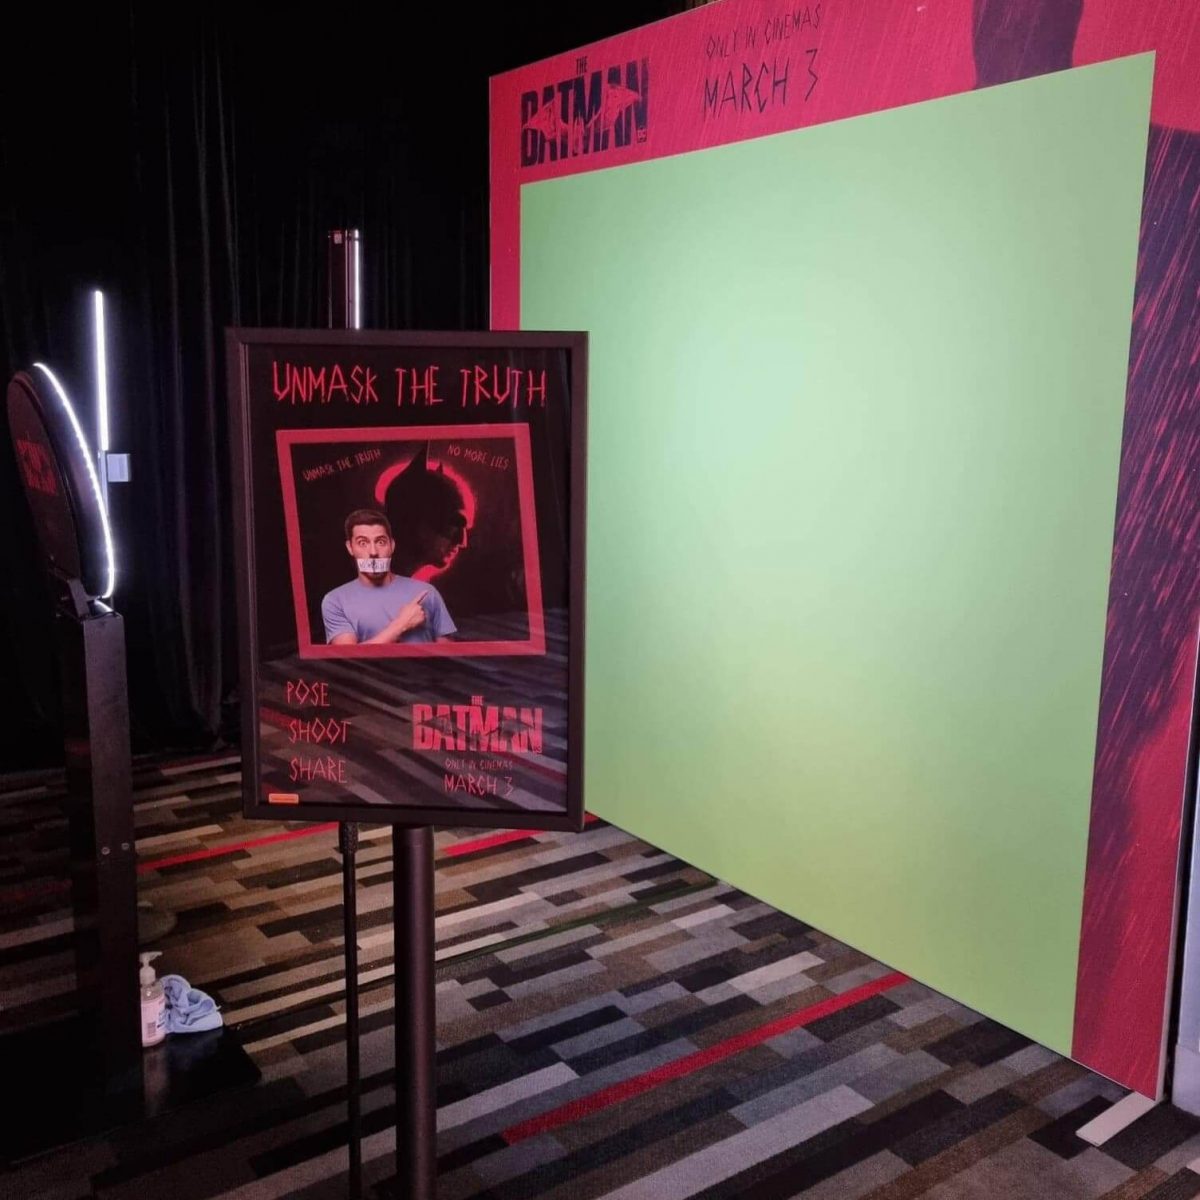 branded green screen set up at a movie premiere for batman with lights and signage and a photo booth